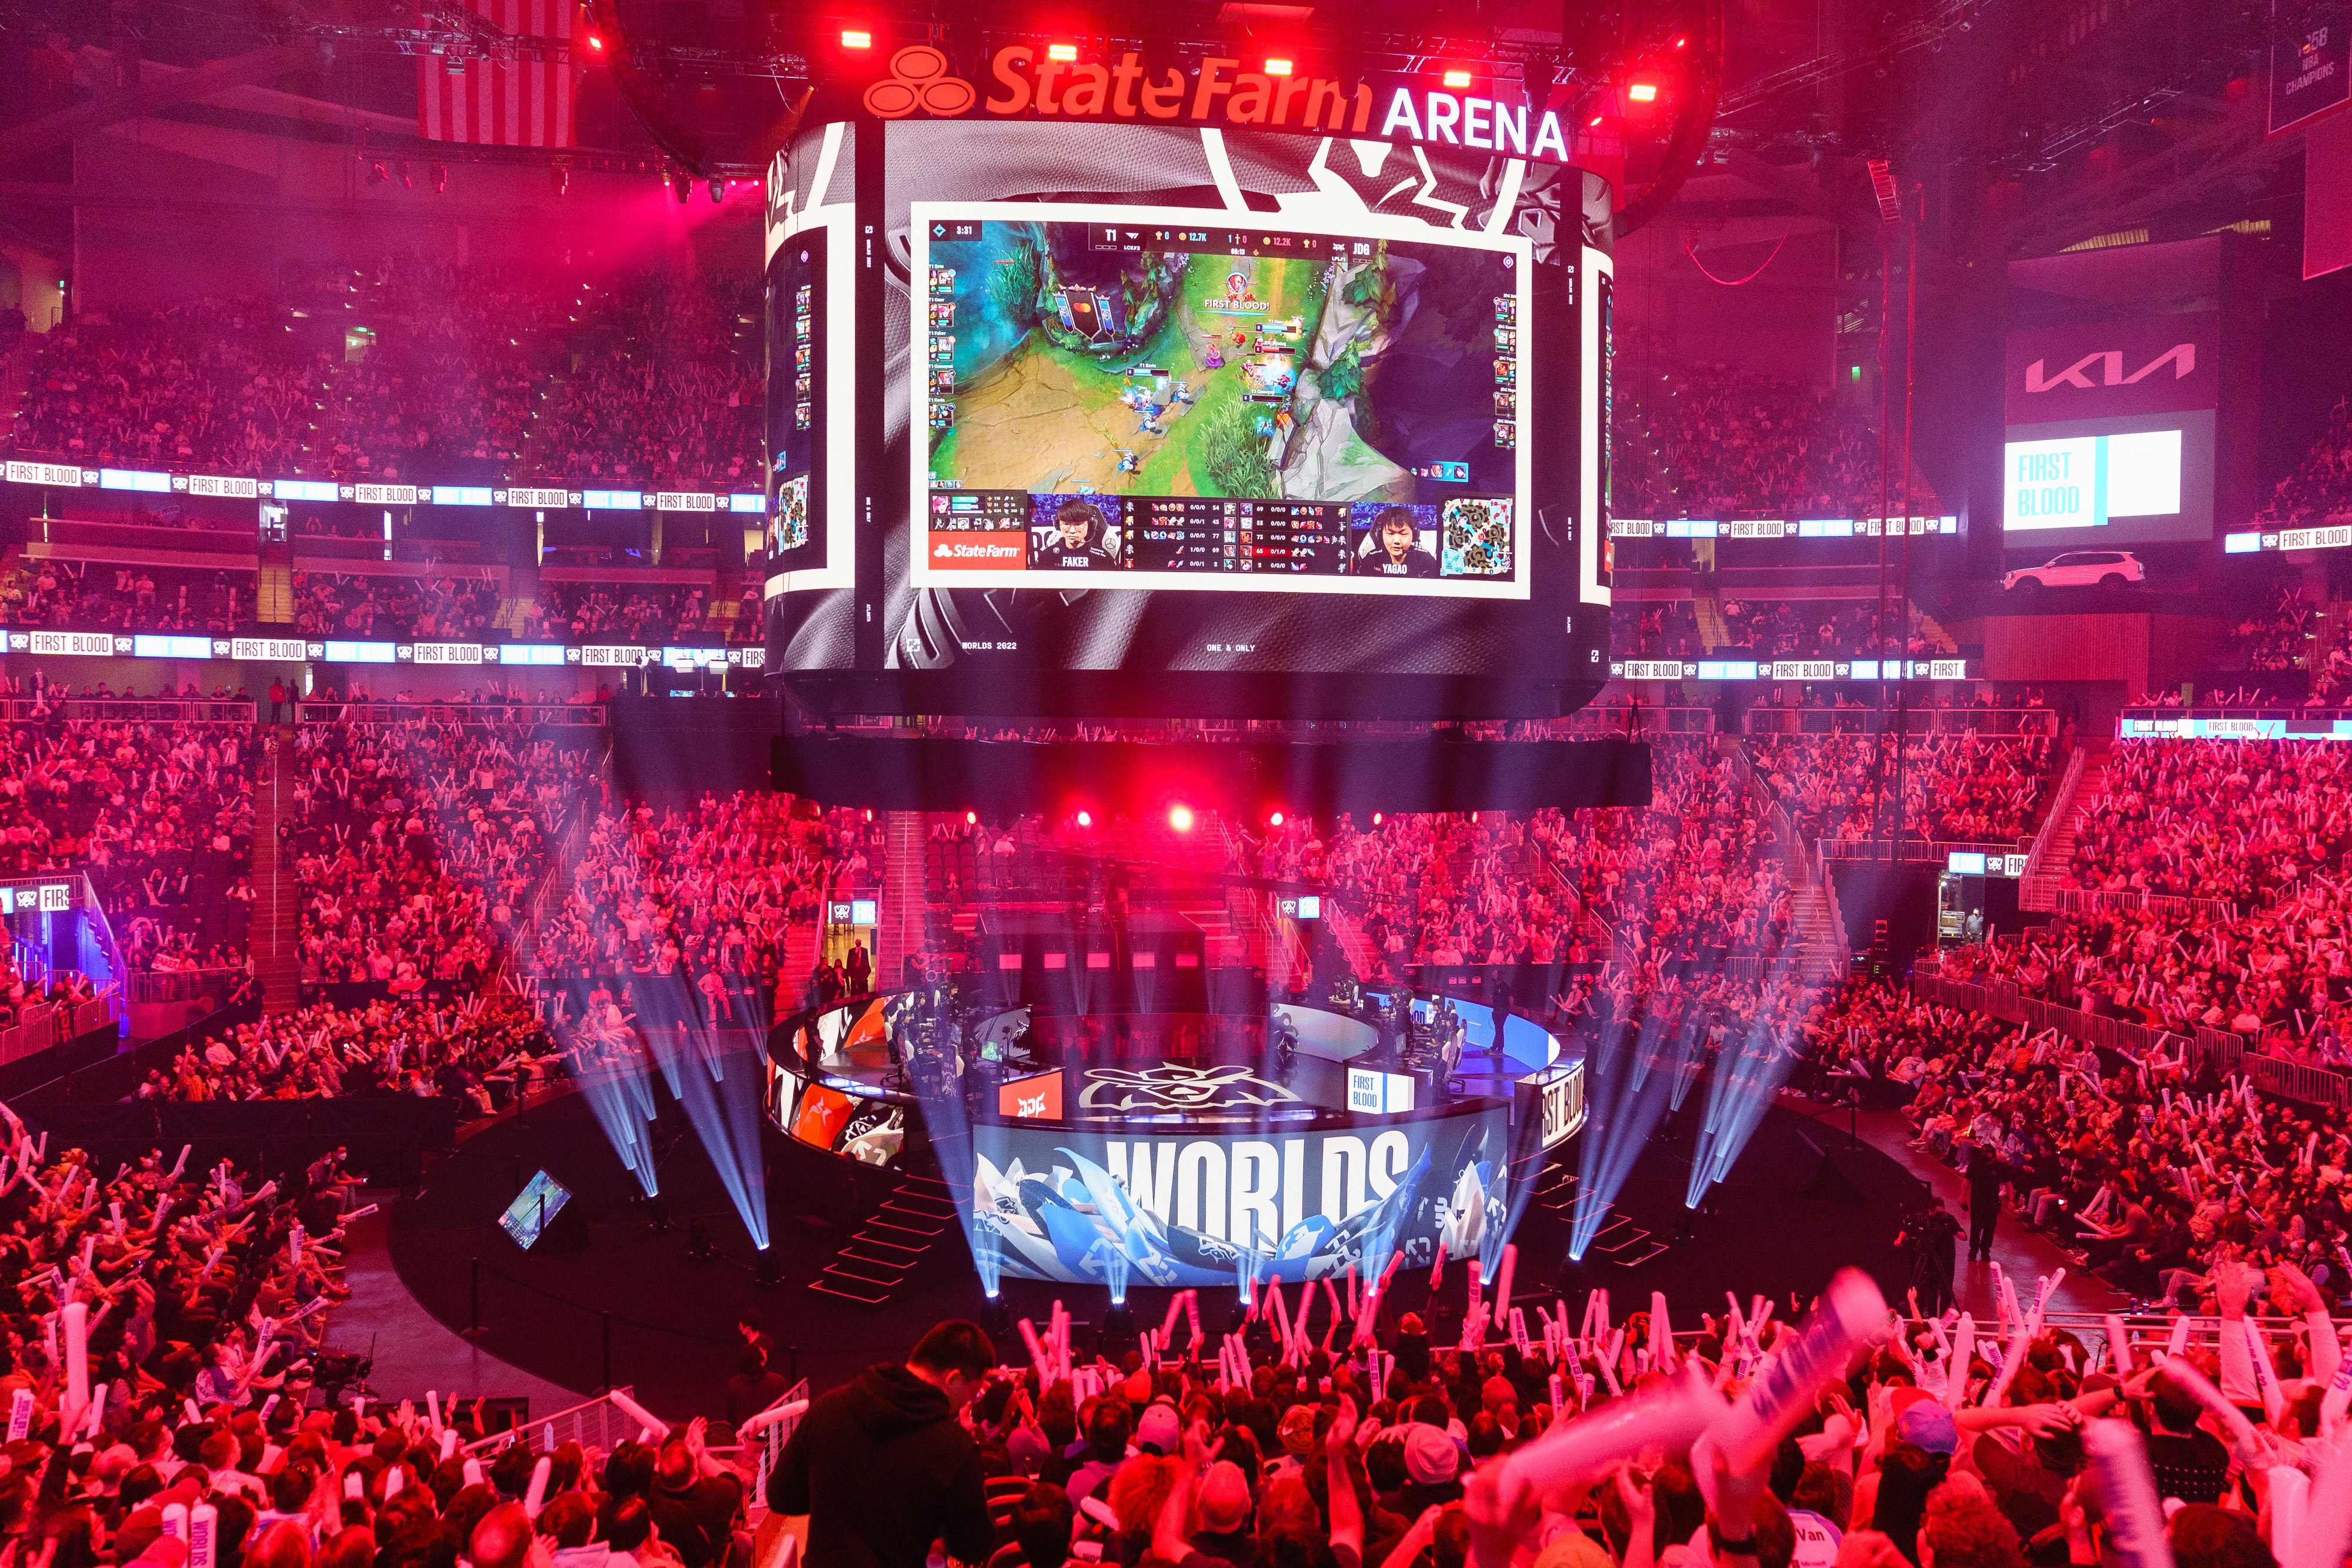 Fans wave inflatable batons during the League of Legends World Championship semi-final match between JD Gaming and T1 at State Farm Arena in Atlanta, Georgia on October 29, 2022. Photo: Agence France-Presse